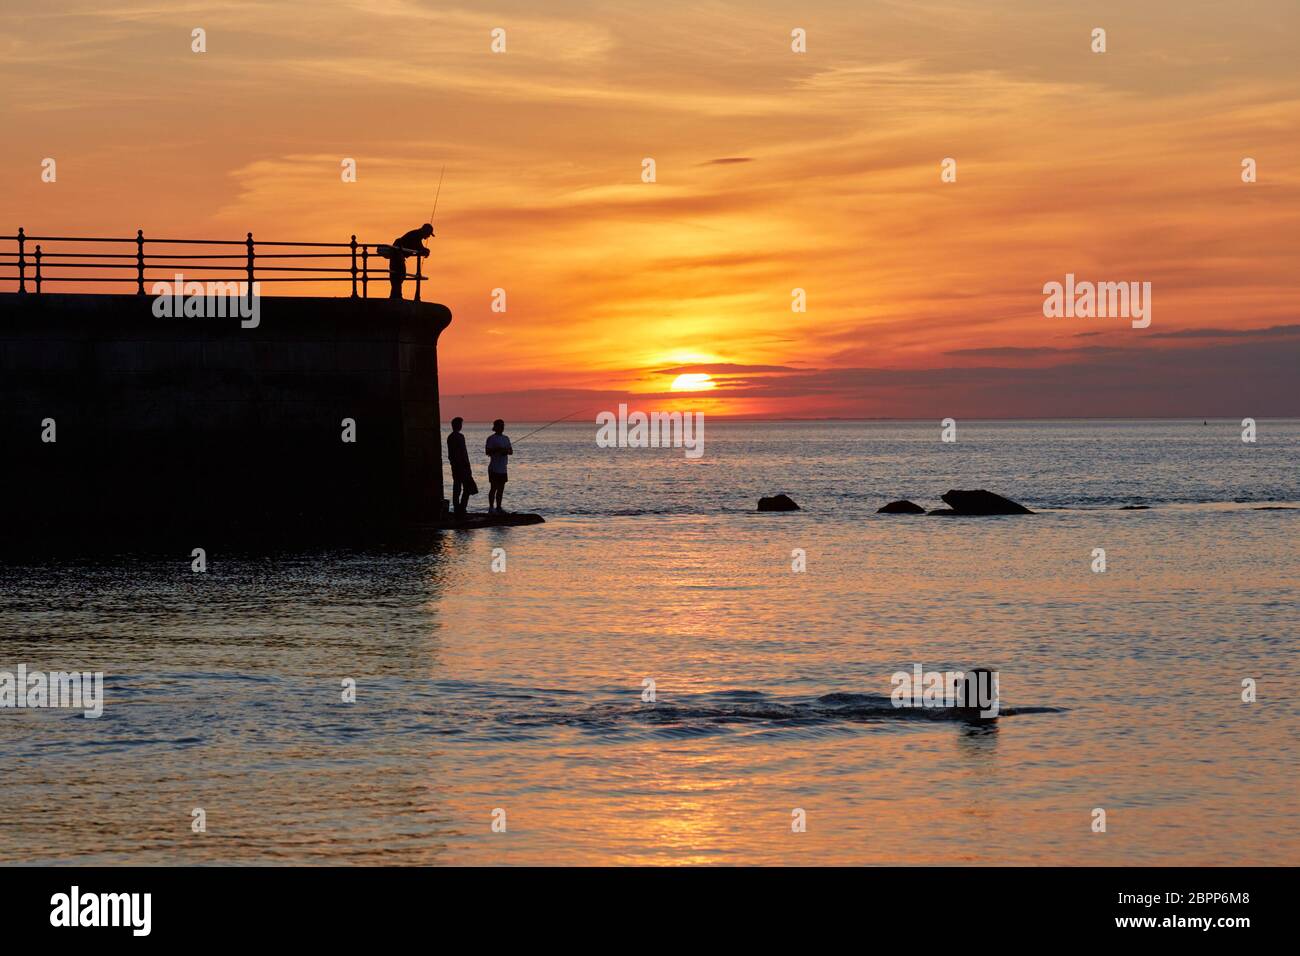 Hampton Pier, Herne Bay, Kent, UK. 19th May 2020: UK Weather. Sunset at Hampton Pier as anglers and a swimmer take advantage of the warm weather and calm conditions as the tide comes in. The next few days could see temperatures up to the high twenties. Credit: Alan Payton/Alamy Live News Stock Photo